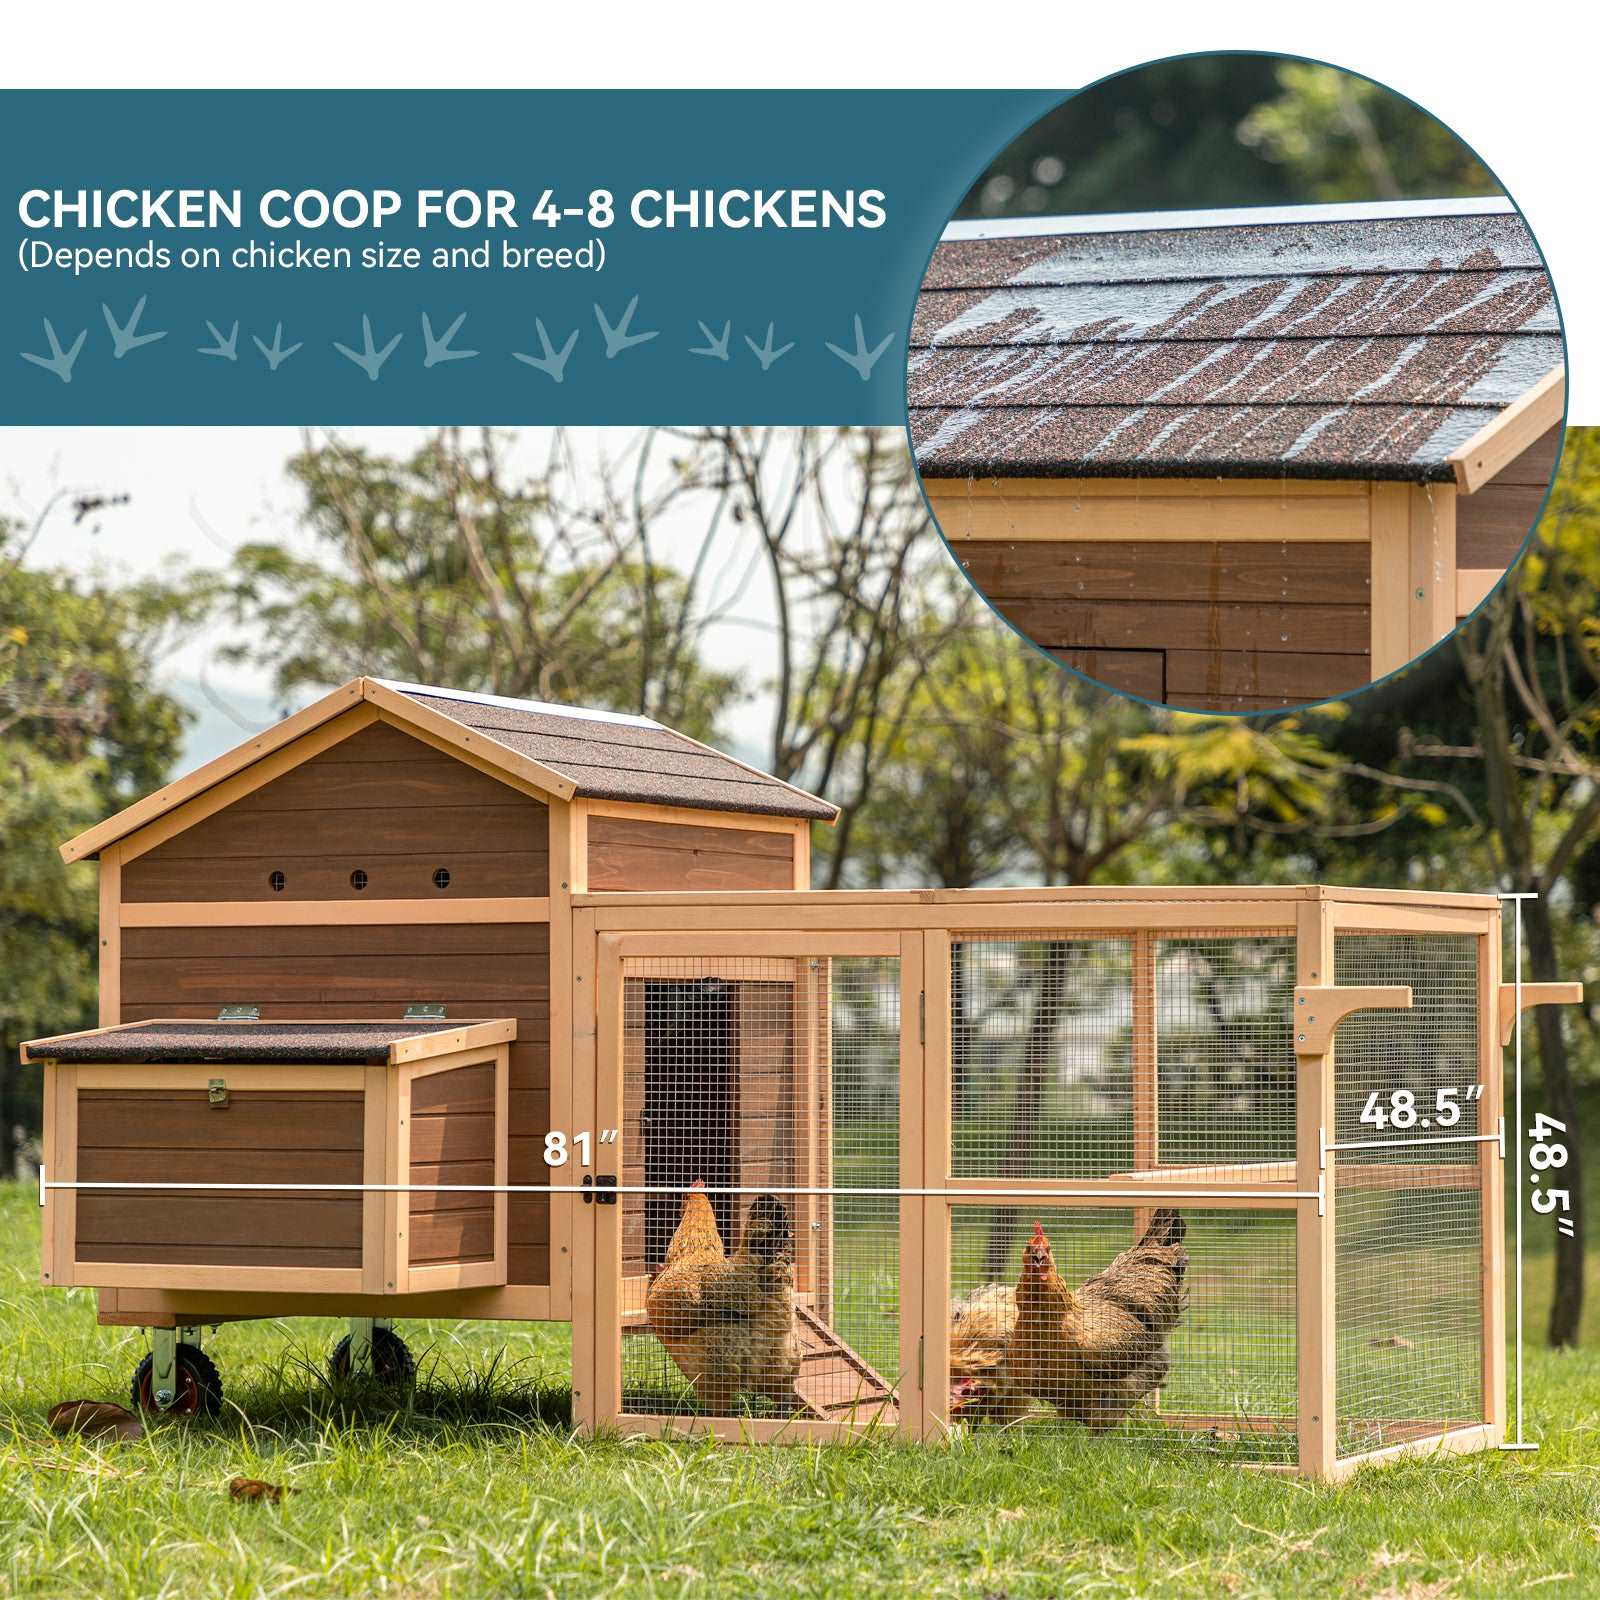 petsfit-large-chicken-coop-tractor-81-hen-house-outdoor-waterproof-poultry-cage-with-nesting-box-wheels-5-access-areas-pull-out-tray-for-easy-cleaning-03